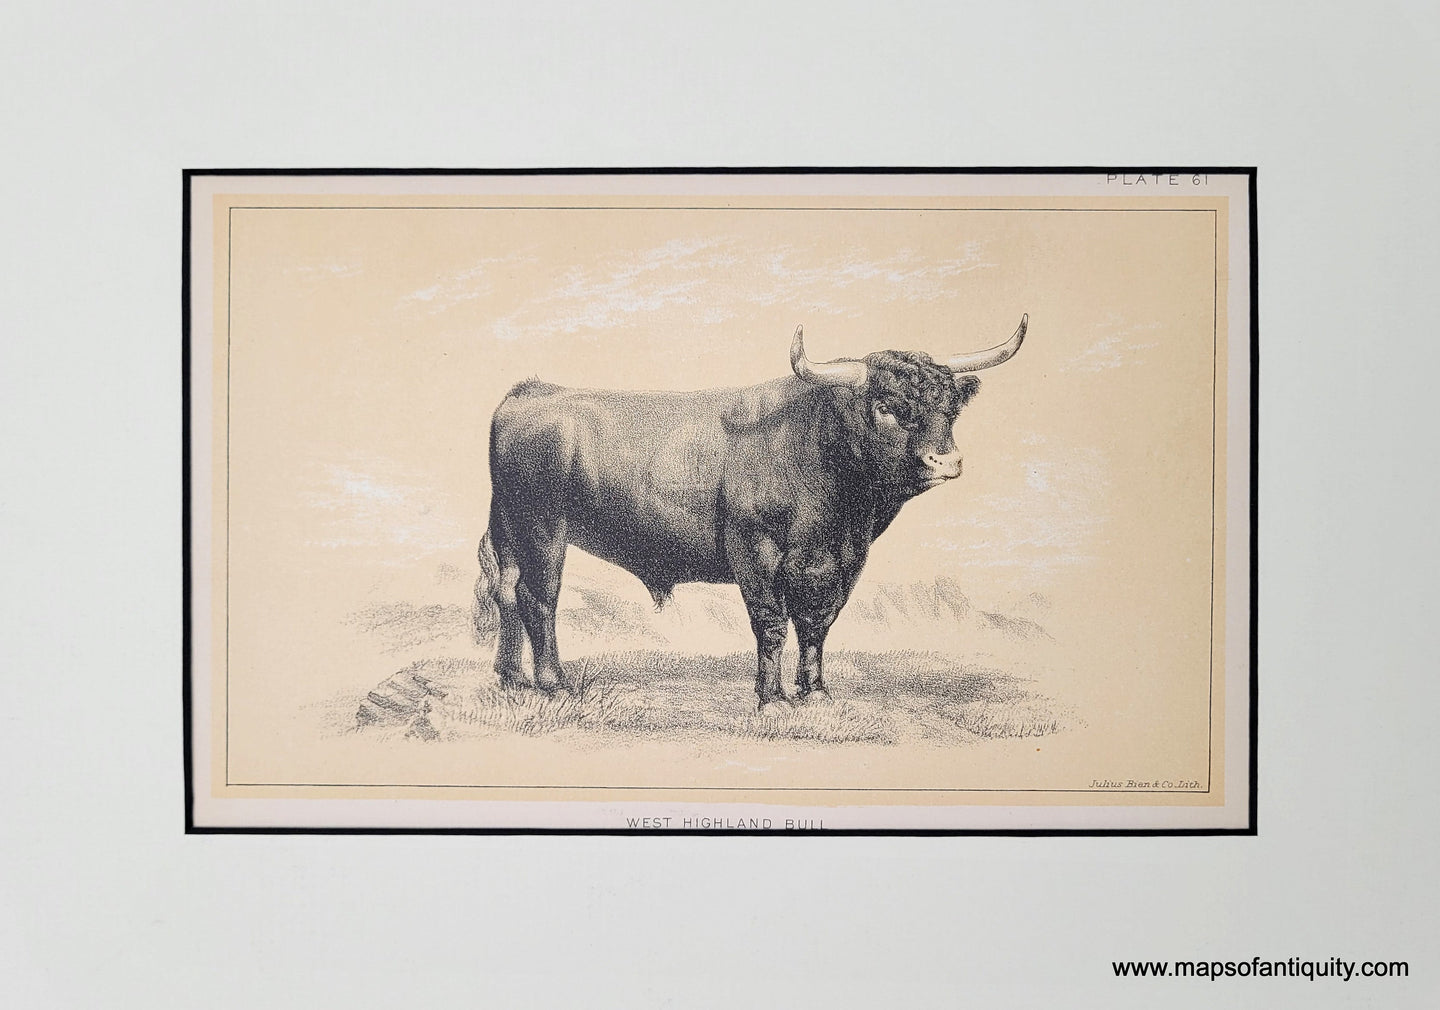 Genuine-Antique-Print-West-Highland-Bull---Plate-61-1888-Bien-Maps-Of-Antiquity